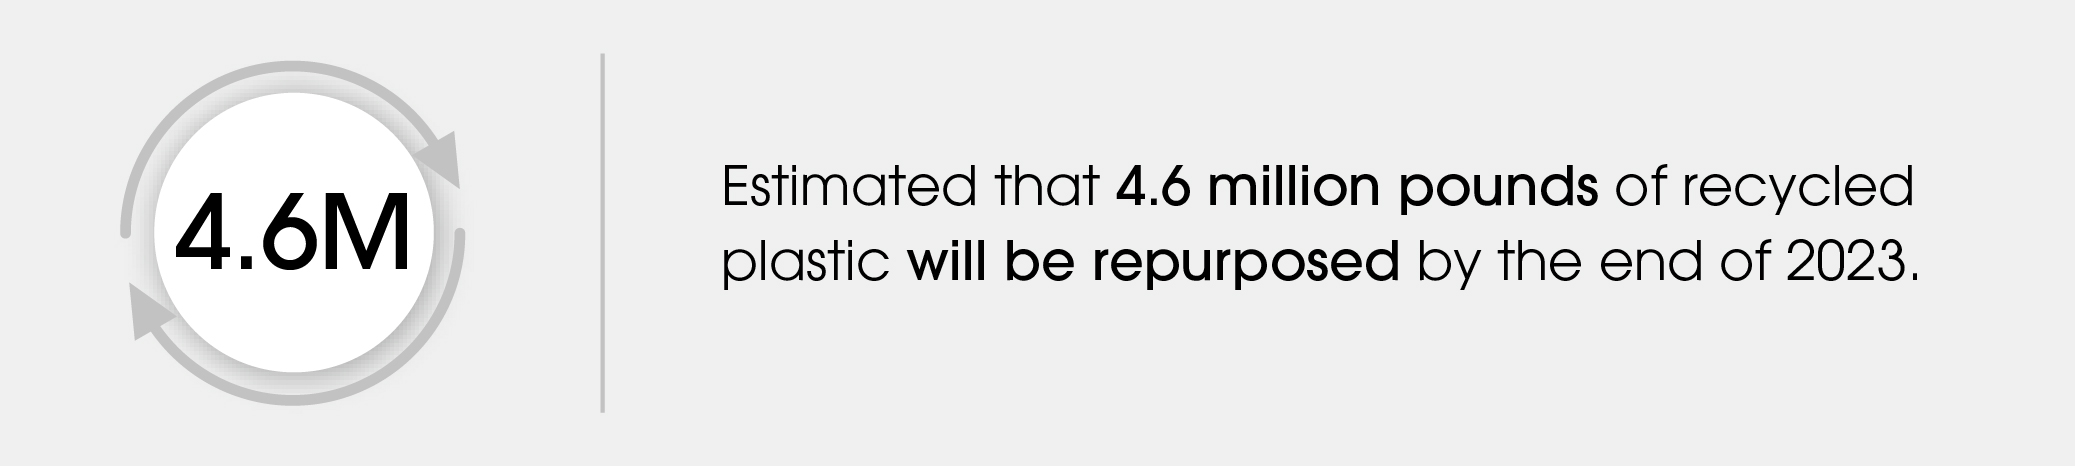 4.6M - Estimated that 4.6 million pounds of recycled plastic will be repurposed by the end of 2023.